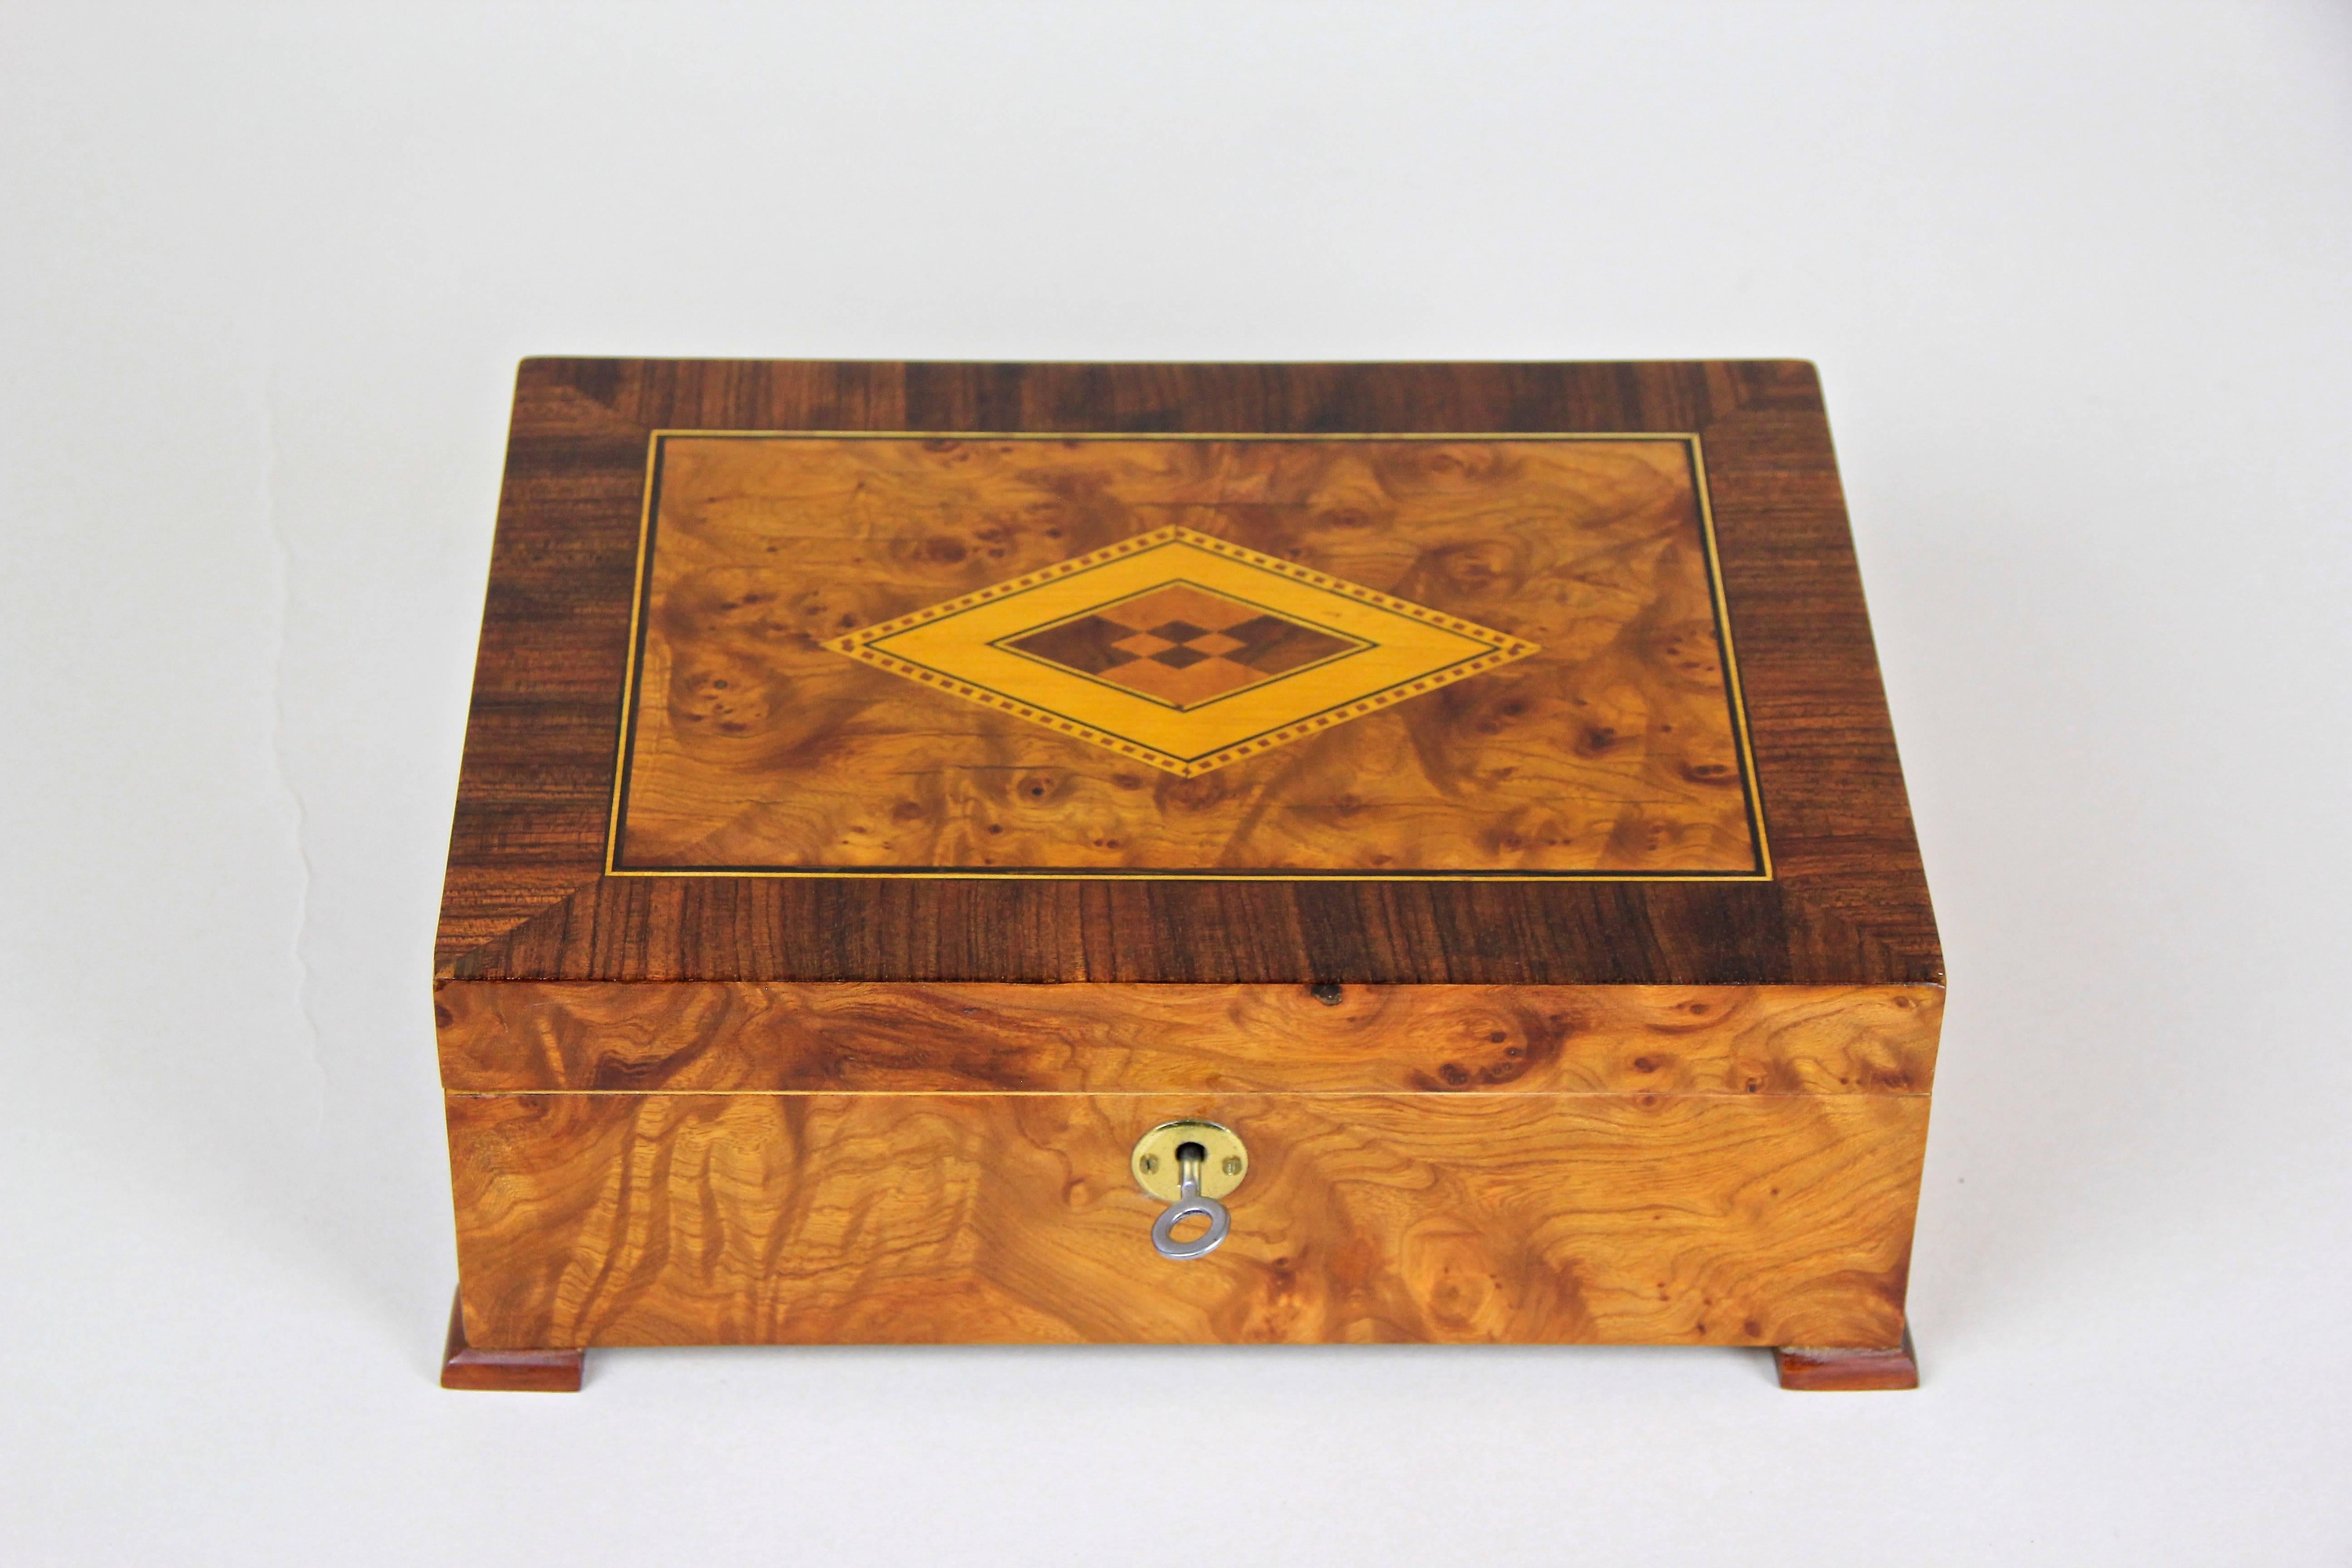 Precious wooden Art Deco box in fine bird's-eye maple with inlay work out of Austria, circa 1920. This highly decorative art deco box impresses not only with its beautiful grain but also with the elaborate inlay work on the lid, processed with